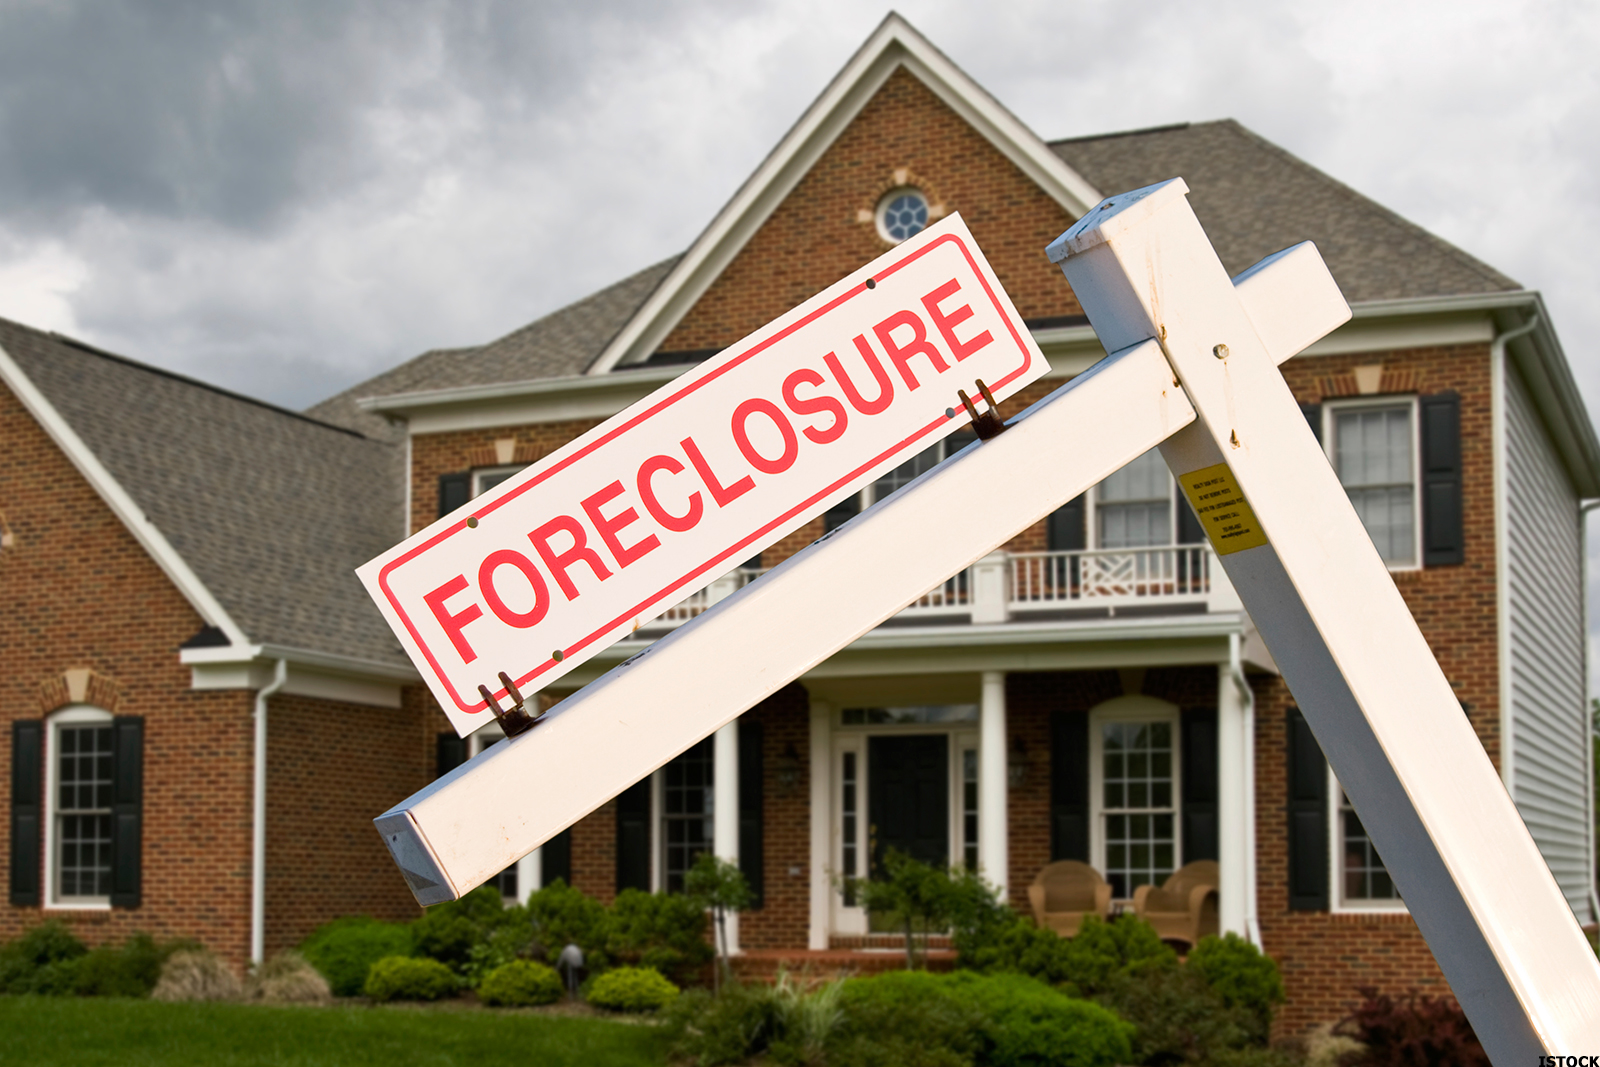 11 Tips For Avoiding Foreclosure In South Florida